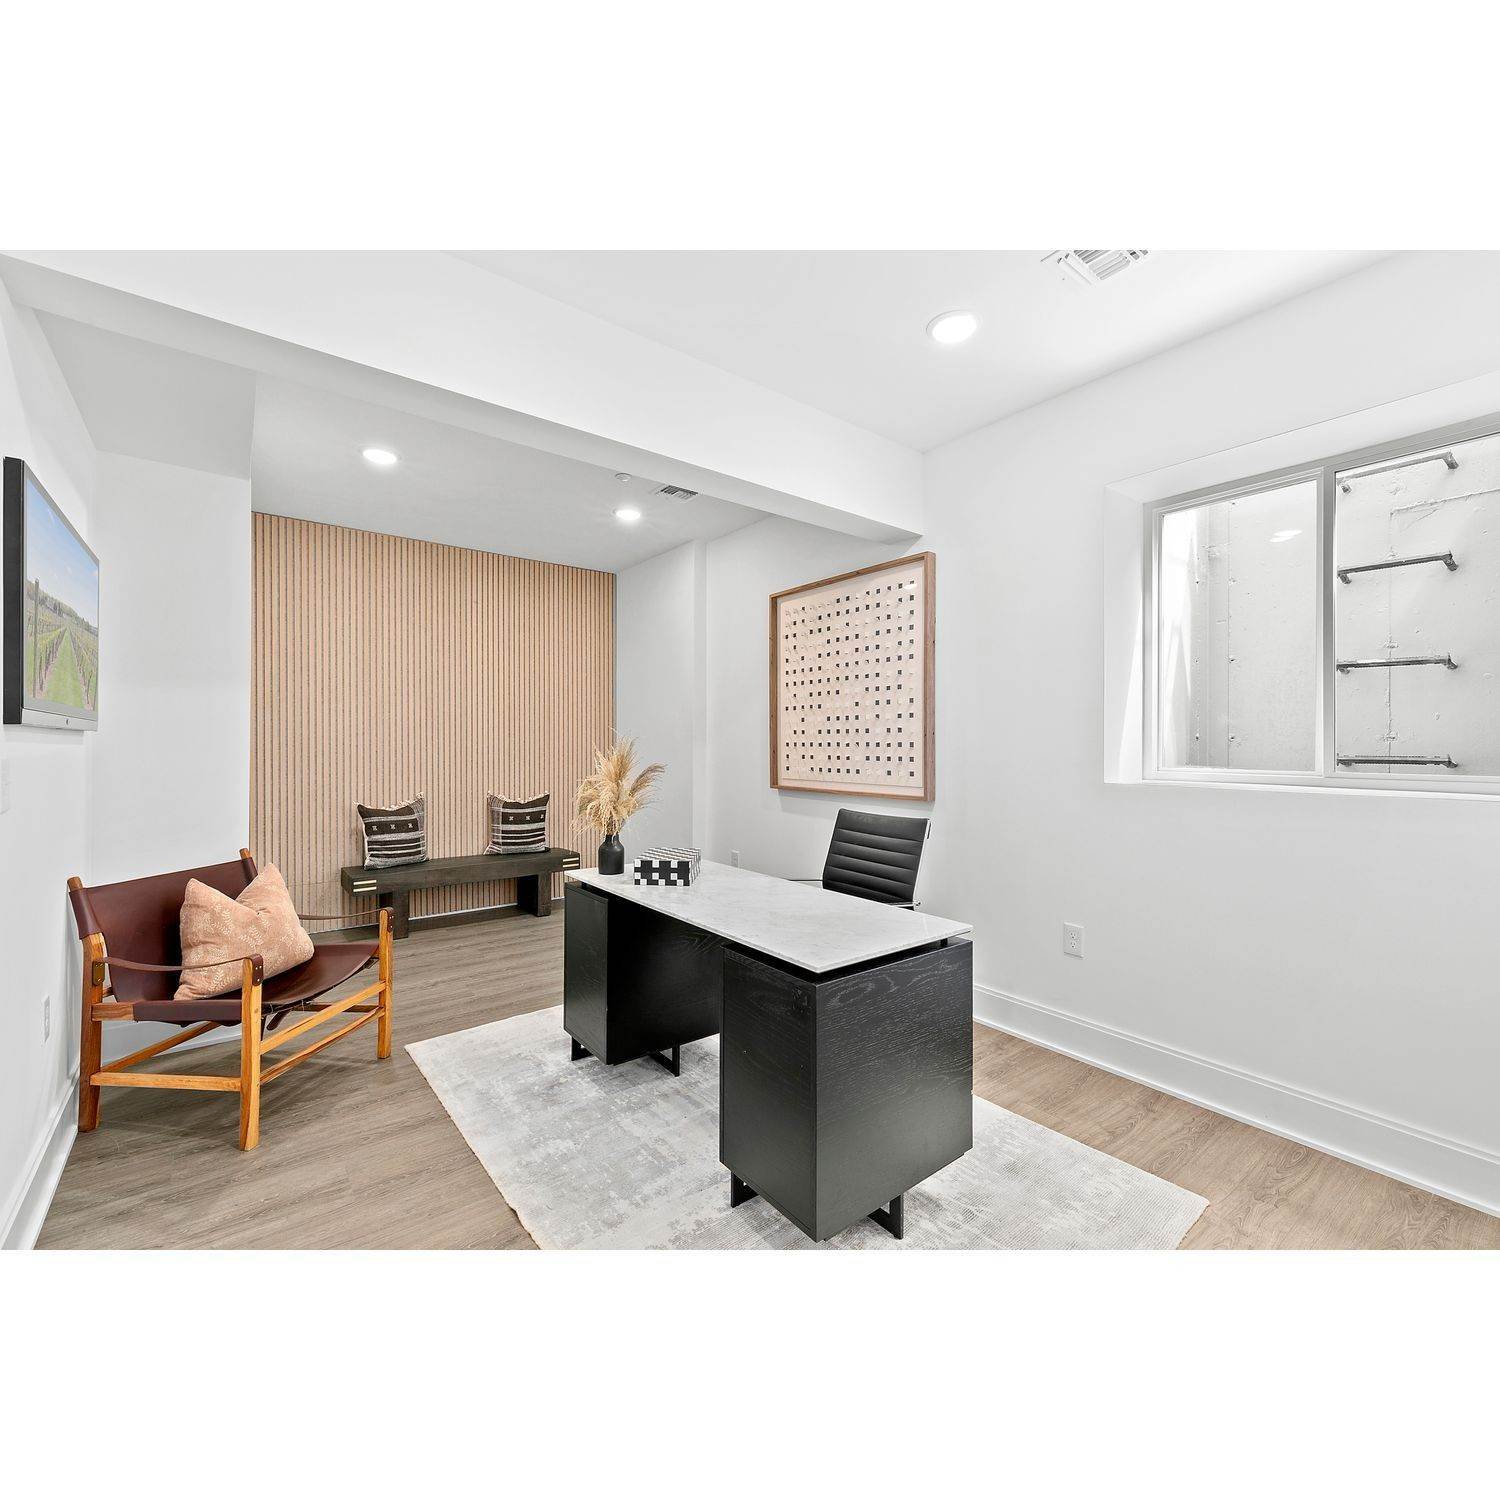 34. Meadowbrook Pointe East Meadow xây dựng tại 123 Merrick Avenue, East Meadow, NY 11554